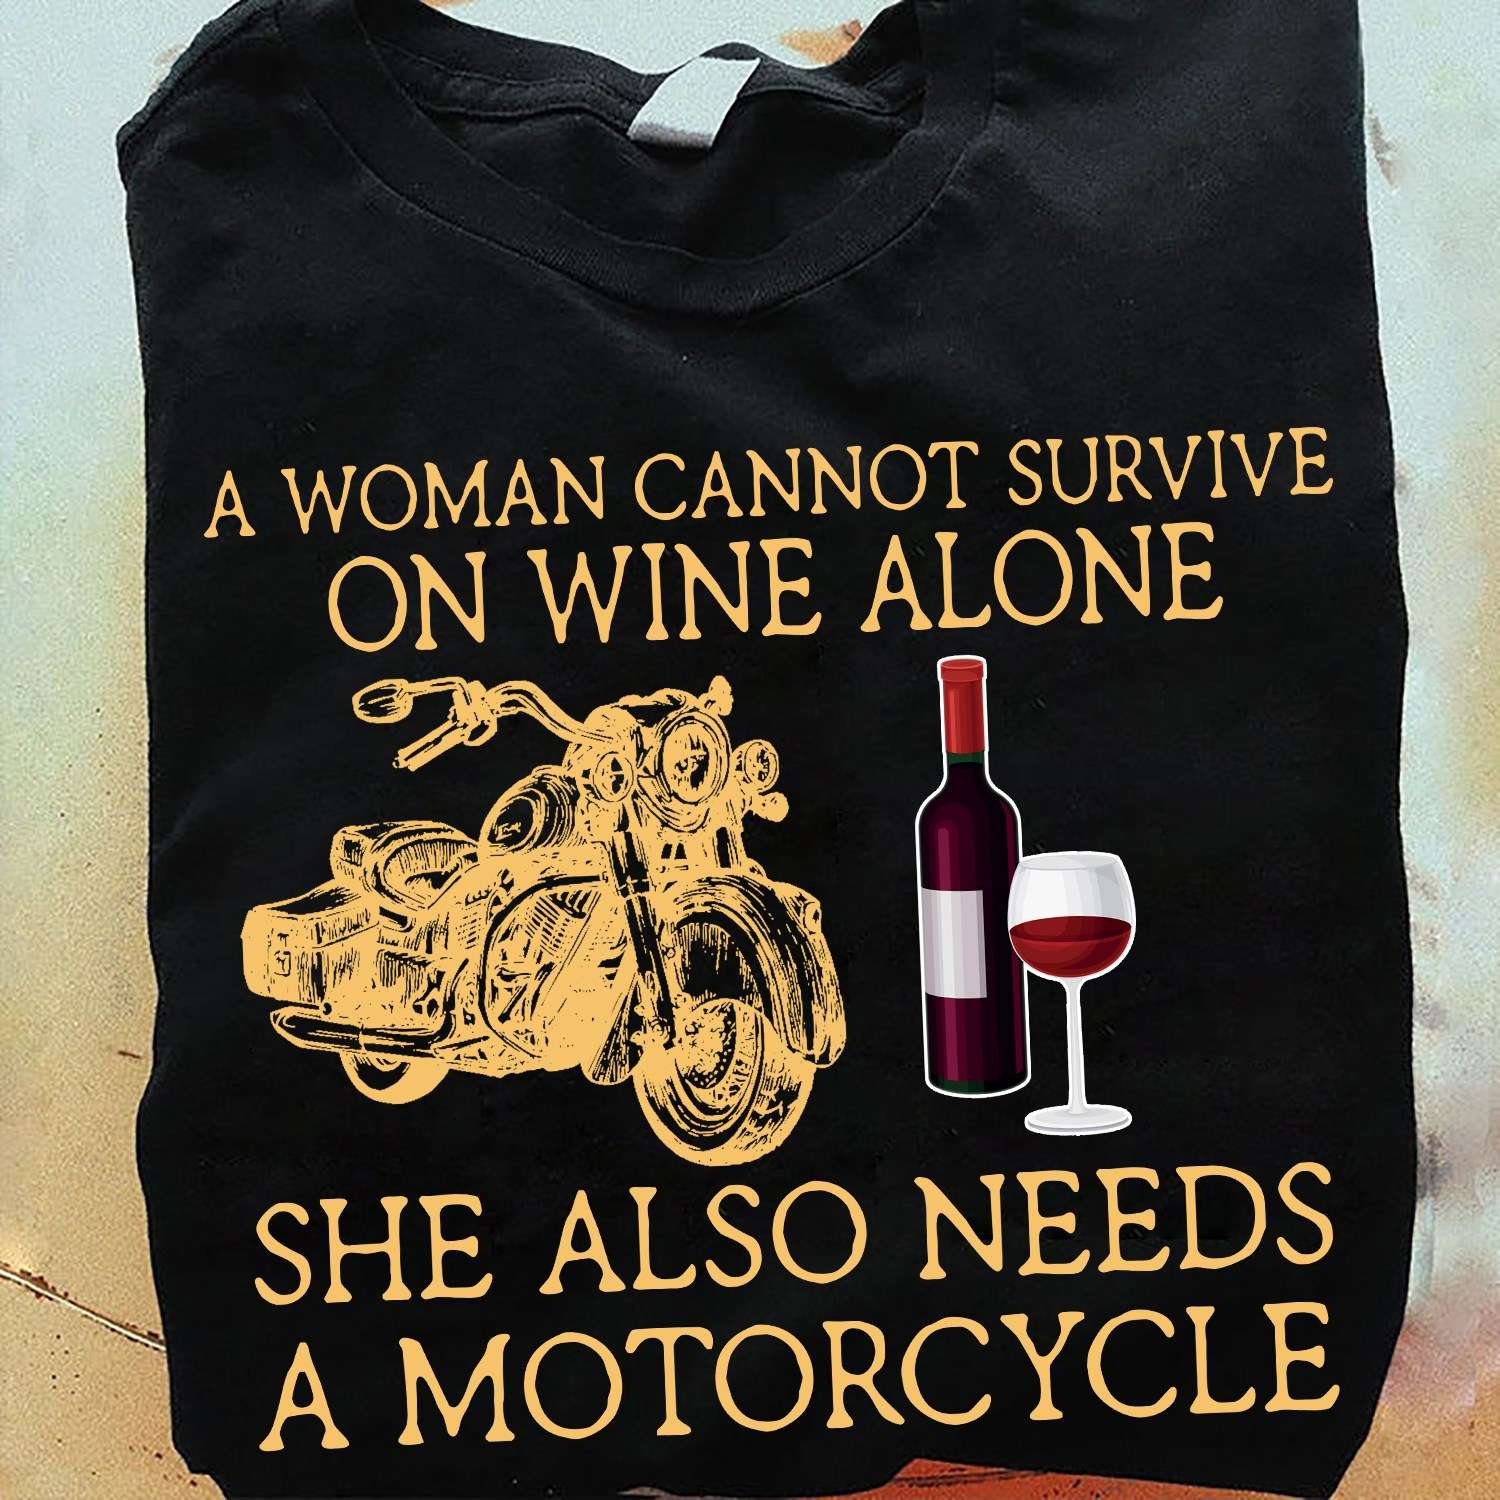 A woman cannot survive on wine alone she also needs a motorcycle - Motorcycle and wine, wine woman